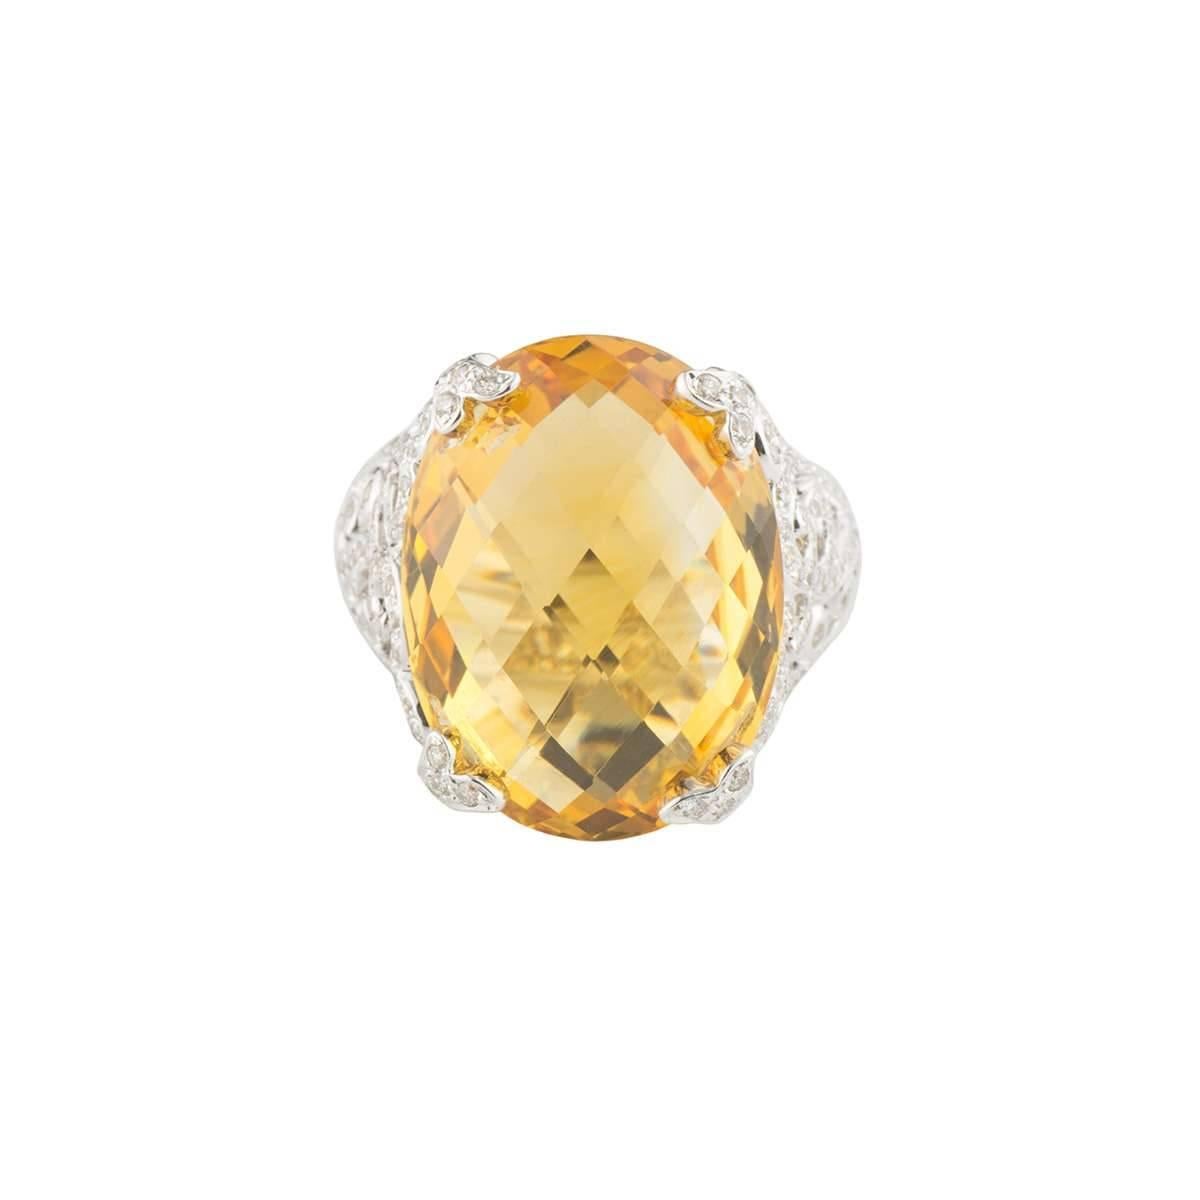 A beautiful 18k white gold diamond and citrine dress ring. The ring comprises of a 15ct oval cut citrine with a orangey-yellow hue throughout. The citrine is complimented with an intricate openwork design with round brilliant cut diamonds, totalling